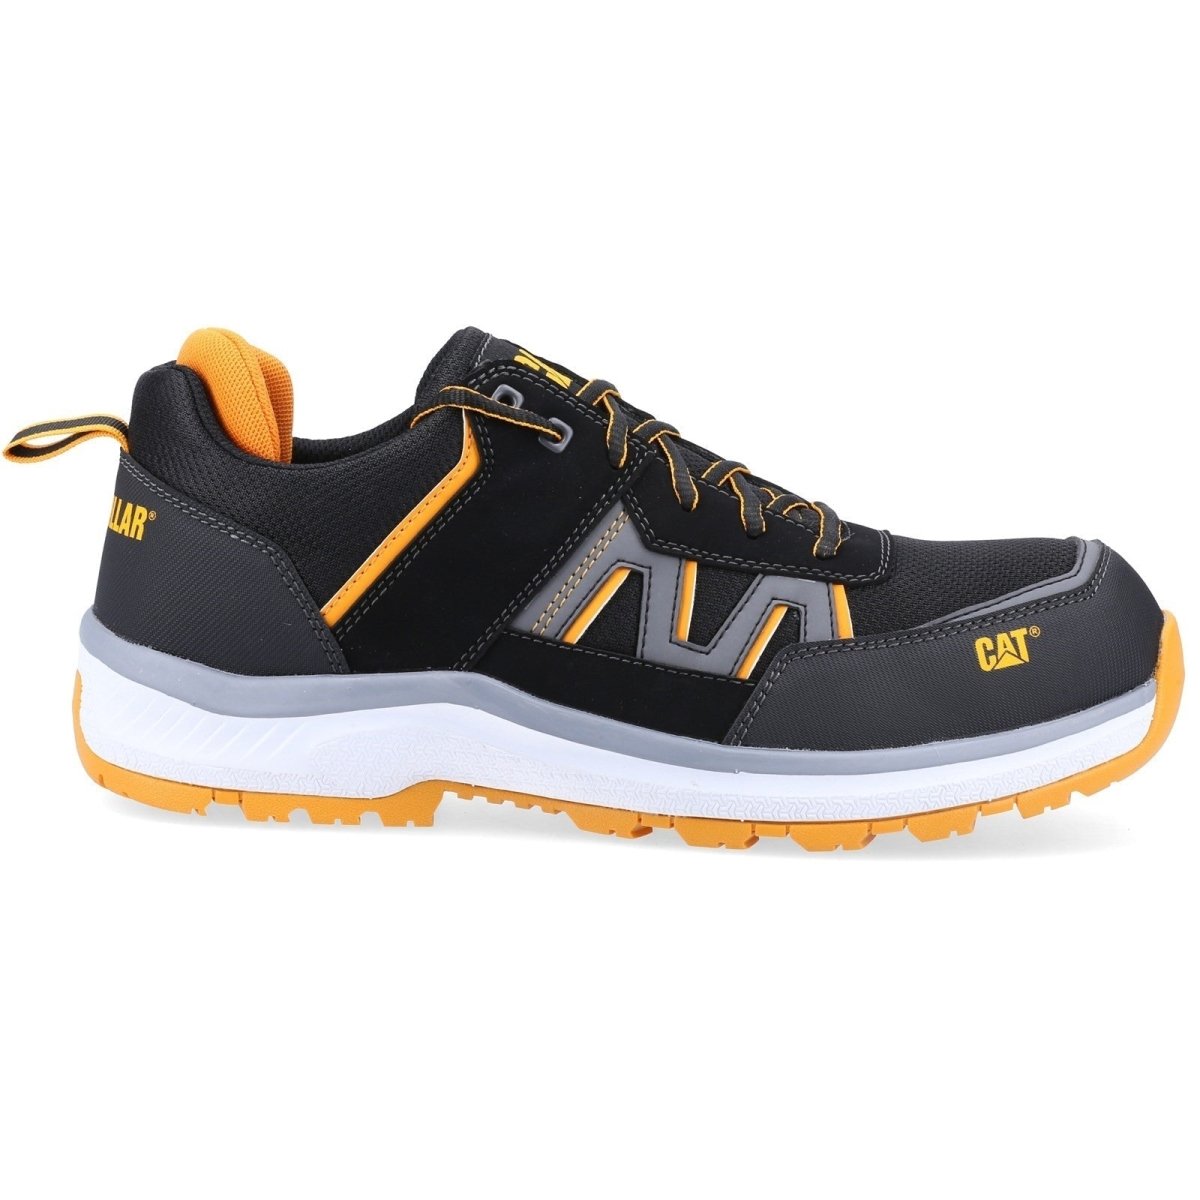 Caterpillar Accelerate S3 Safety Trainer - Shoe Store Direct